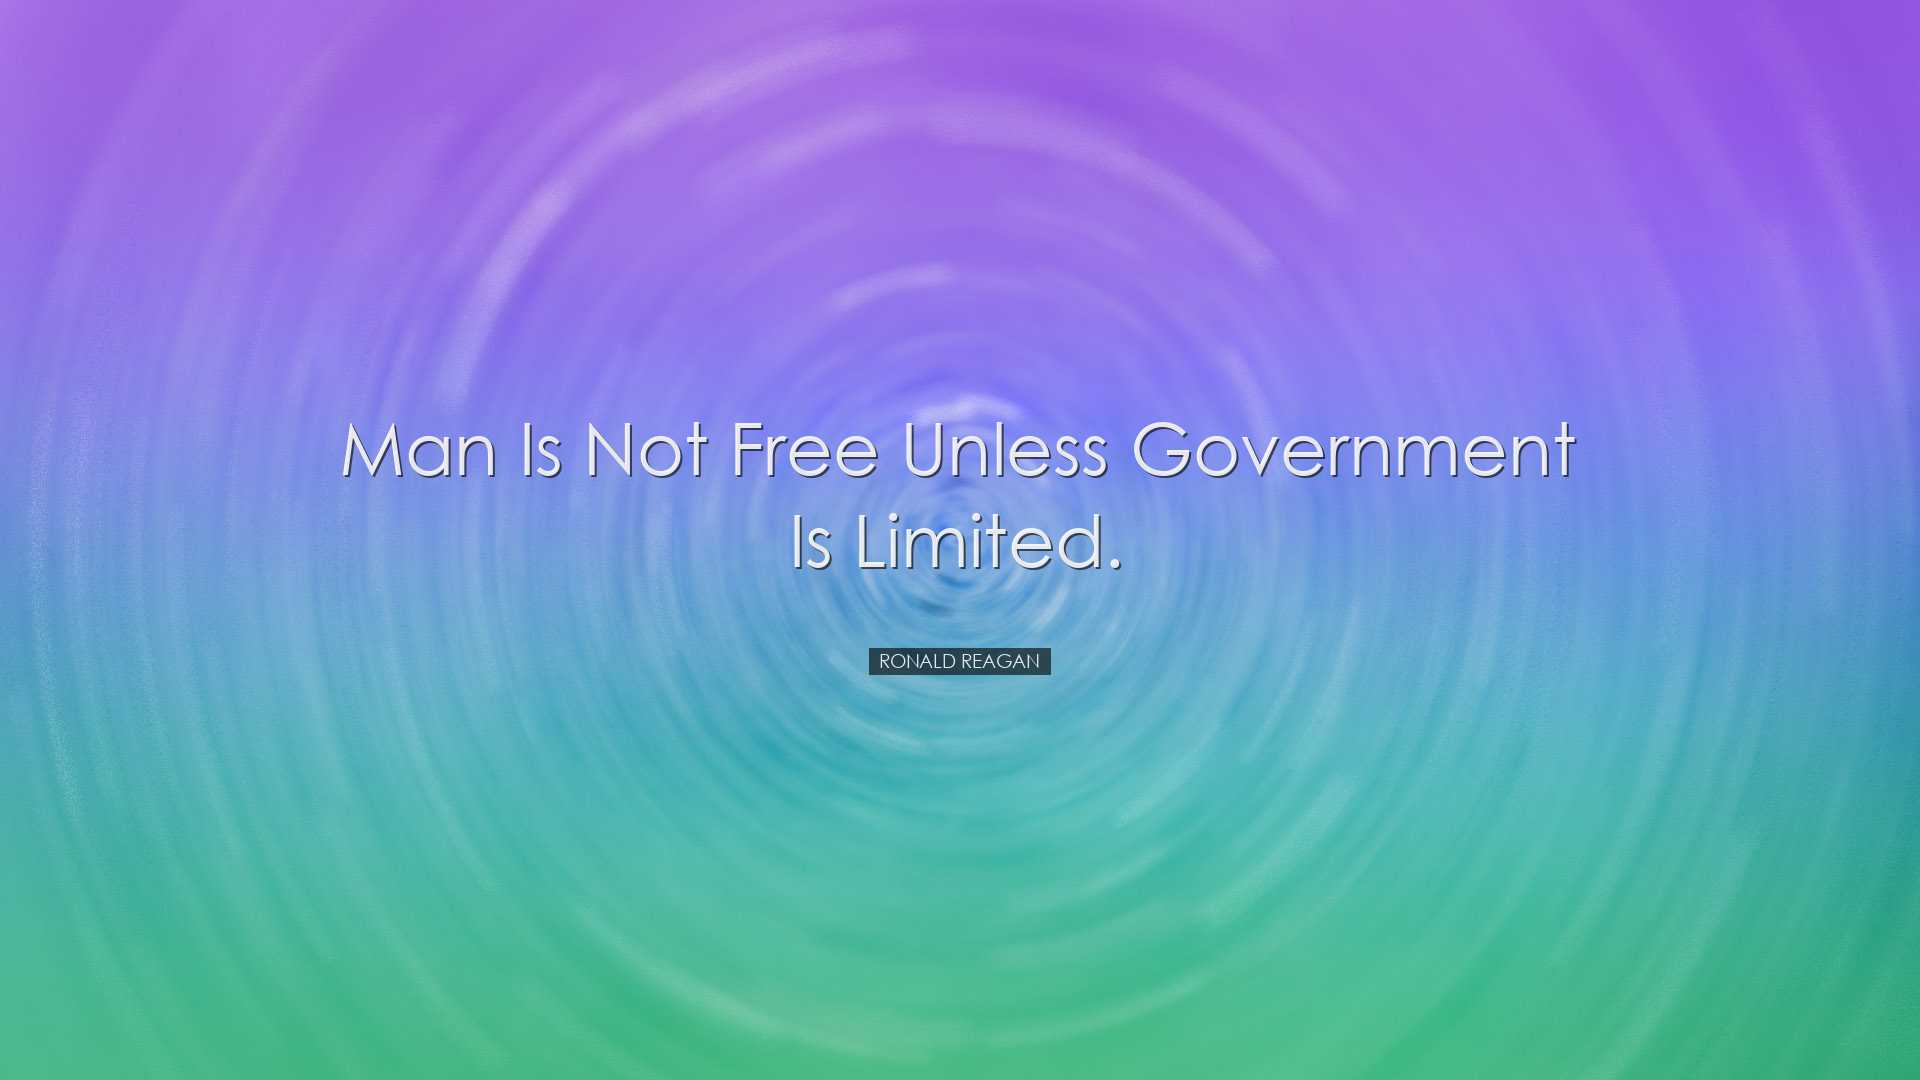 Man is not free unless government is limited. - Ronald Reagan